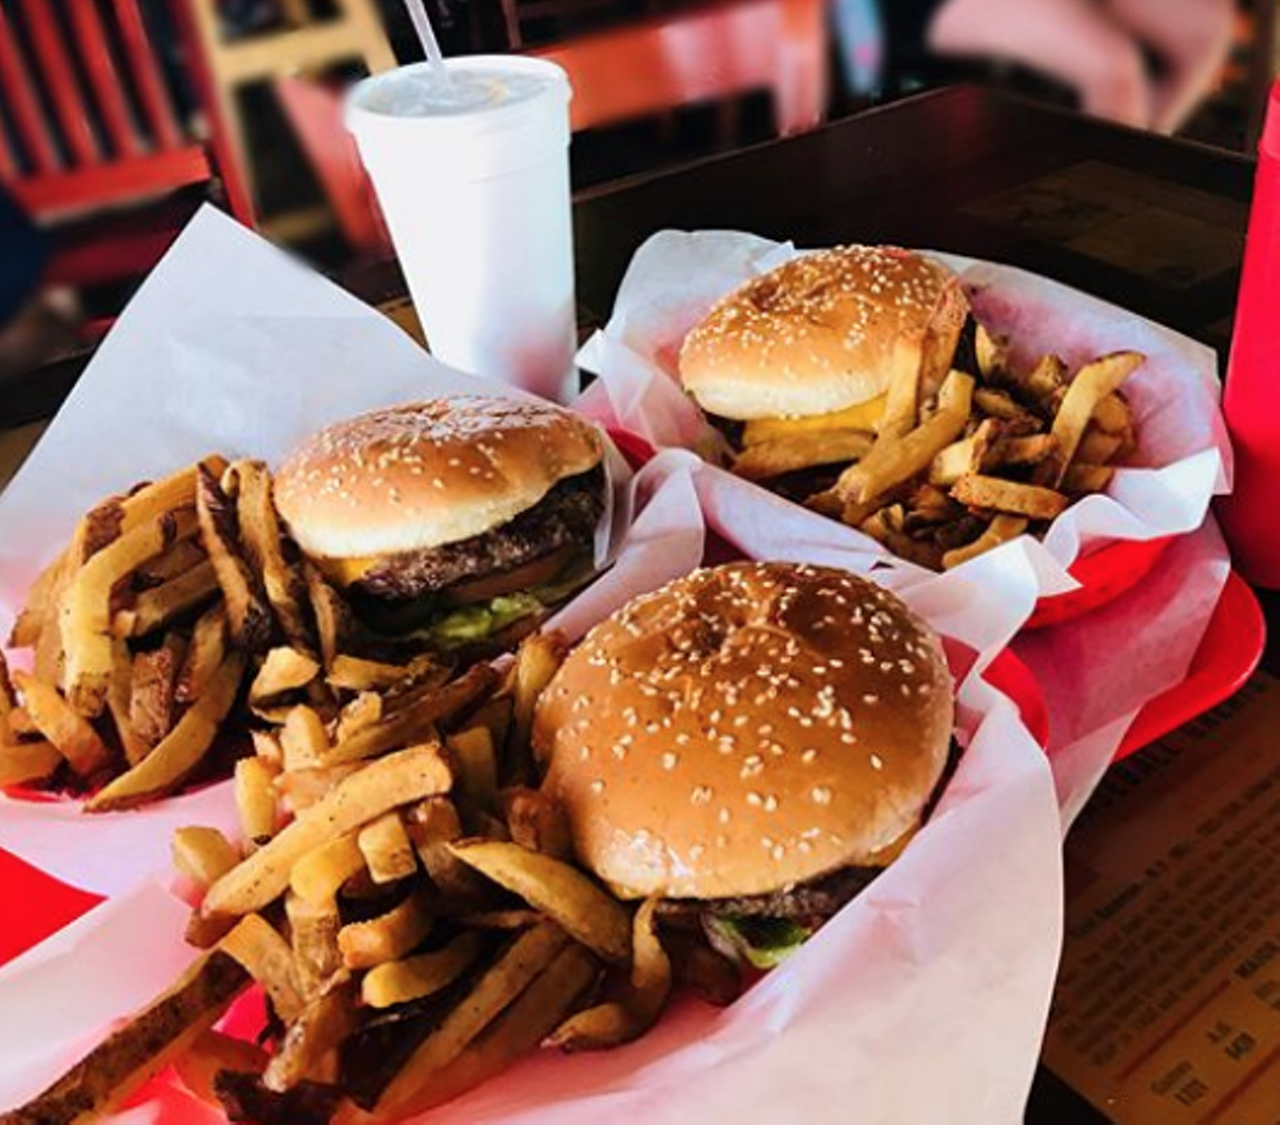 Babe's Old Fashioned Food
Multiple locations, babeshamburgers.com
Visit any of the Babe’s locations across the Alamo City and take advantage of this deal. You’ll find The Babe — which includes bacon, swiss cheese and BBQ sauce — available for just $5.
Photo via Instagram / bite_me_texas_foodie